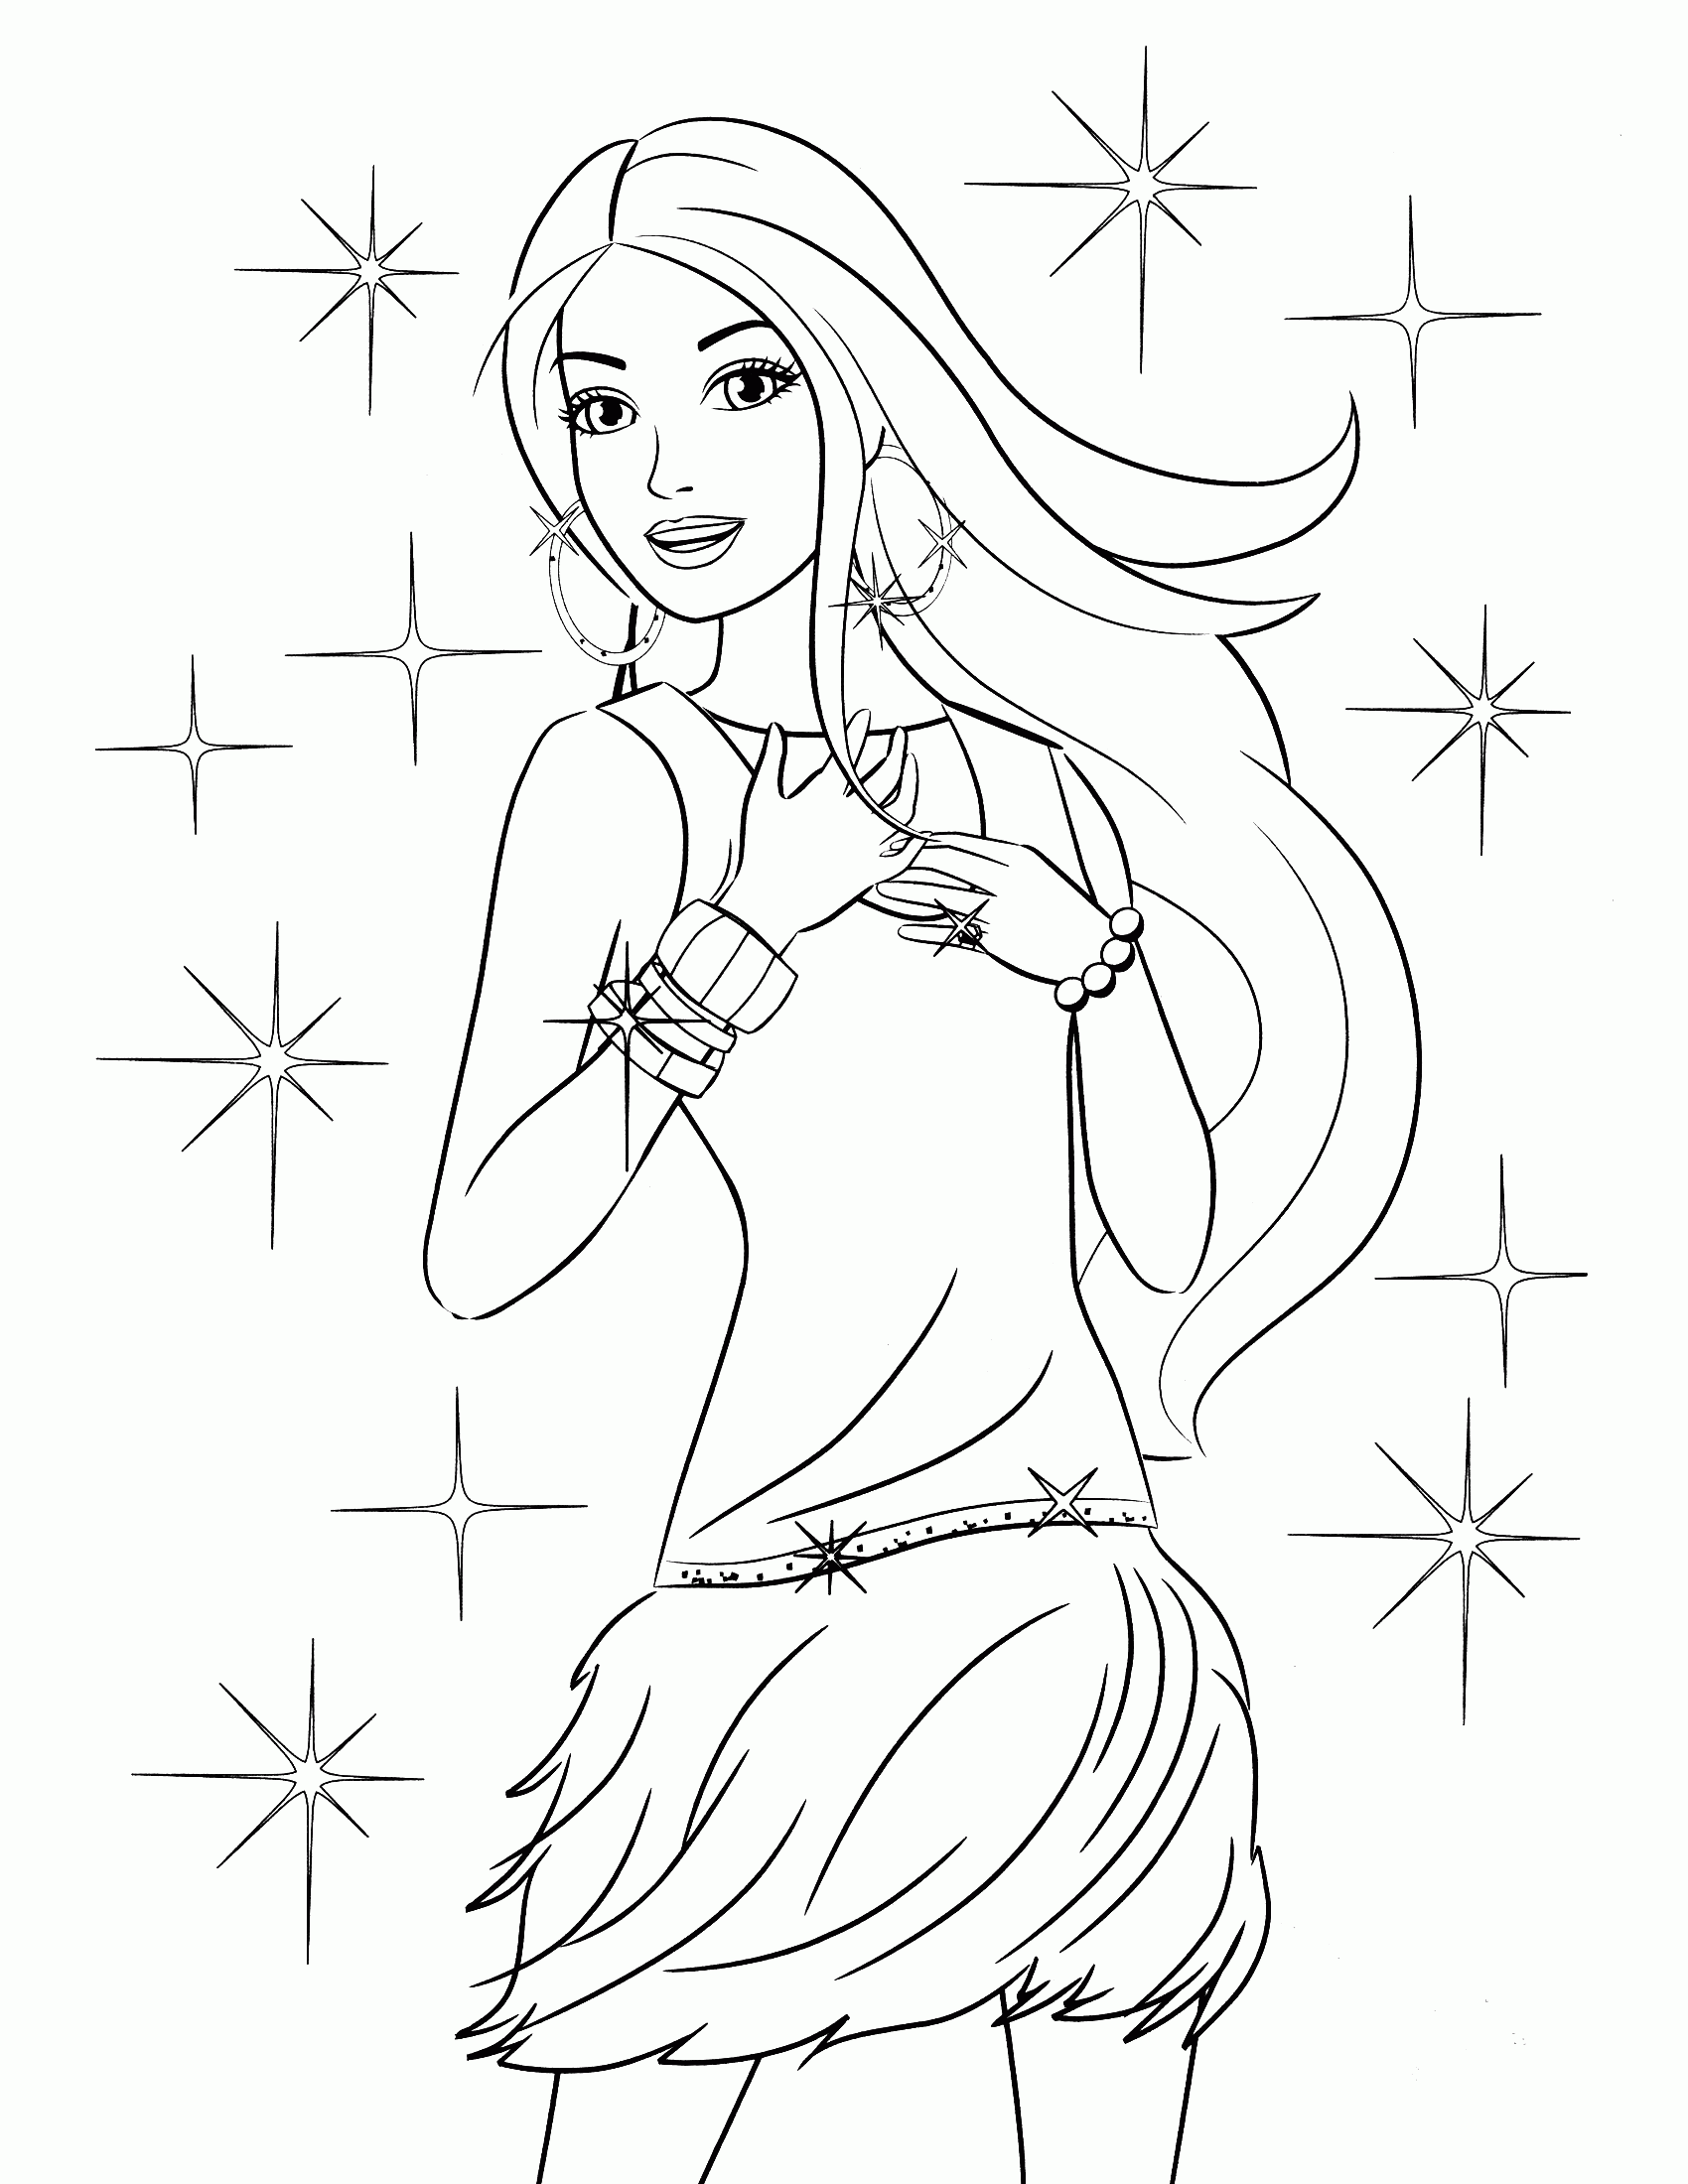 Ballerina Bunny Coloring Page - Coloring Pages For All Ages - Coloring Home